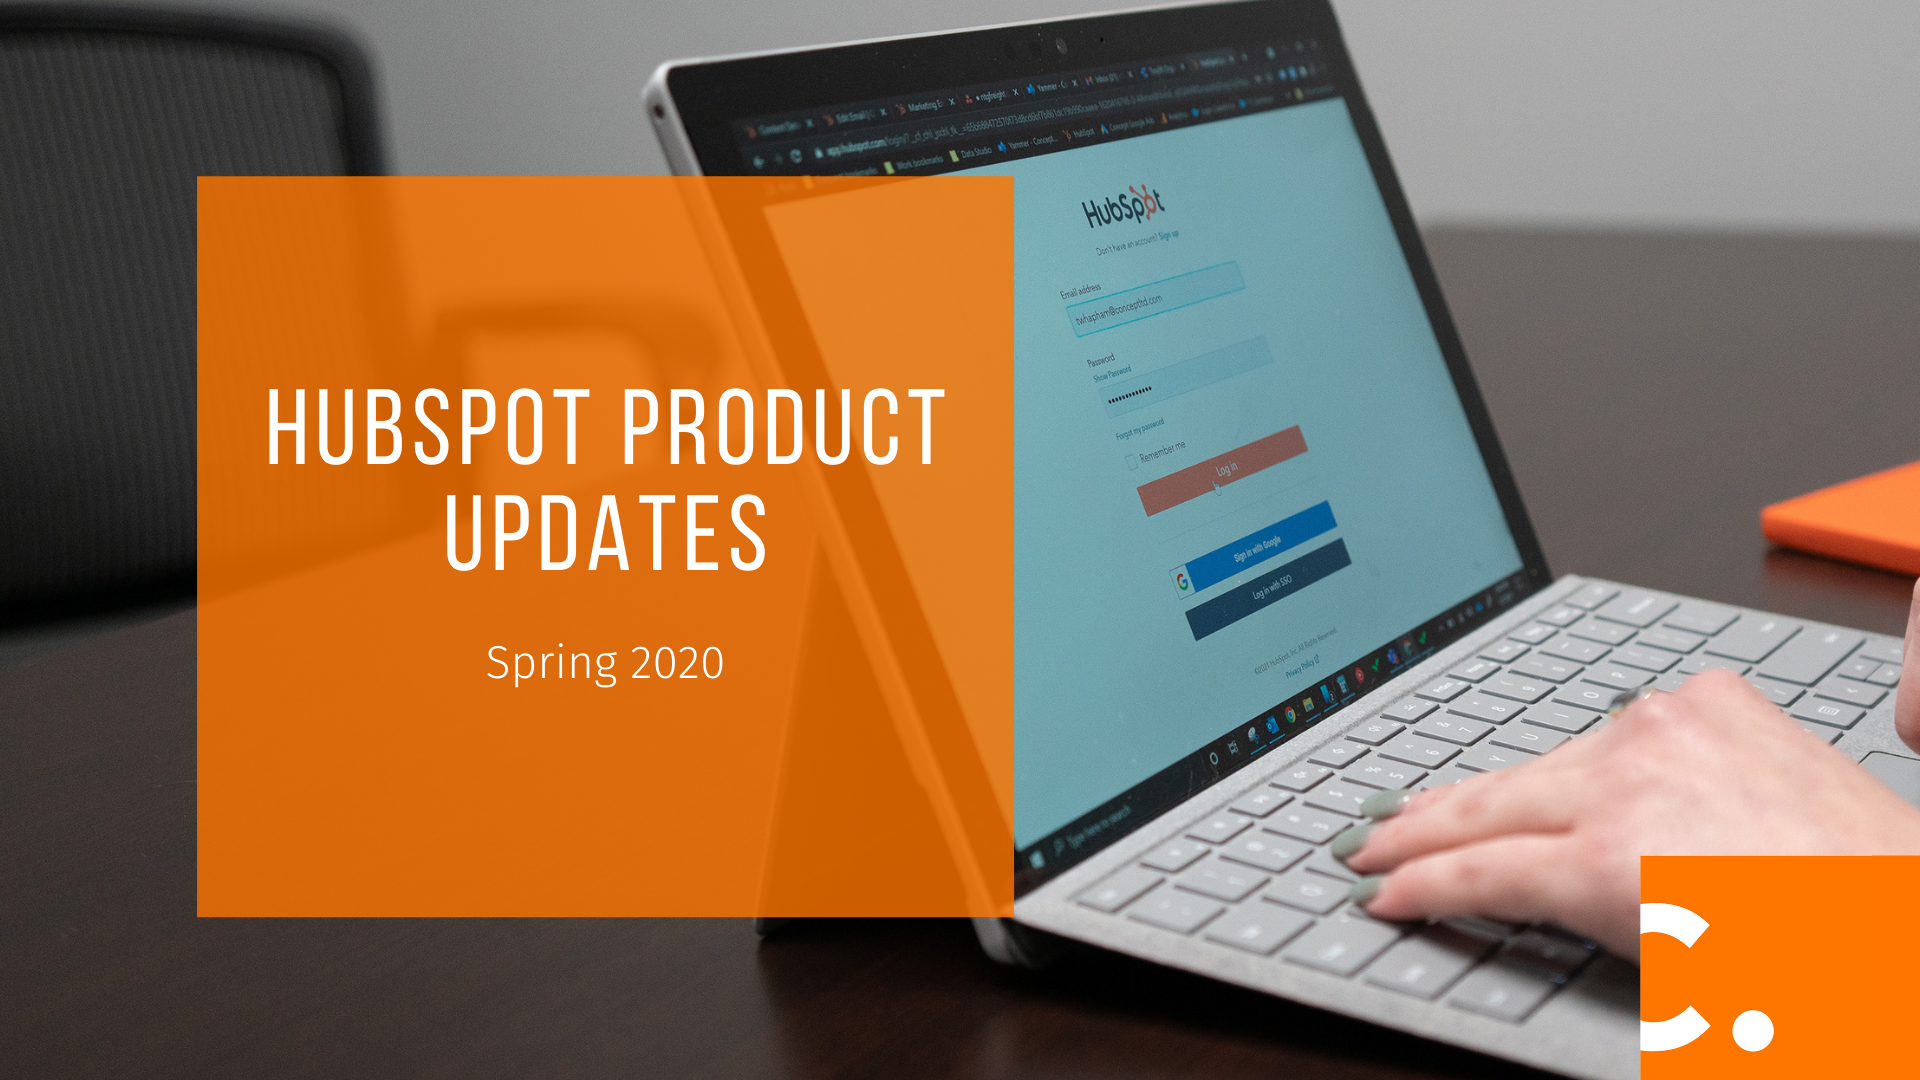 See what to expect from HubSpot with their Spring 2020 product updates